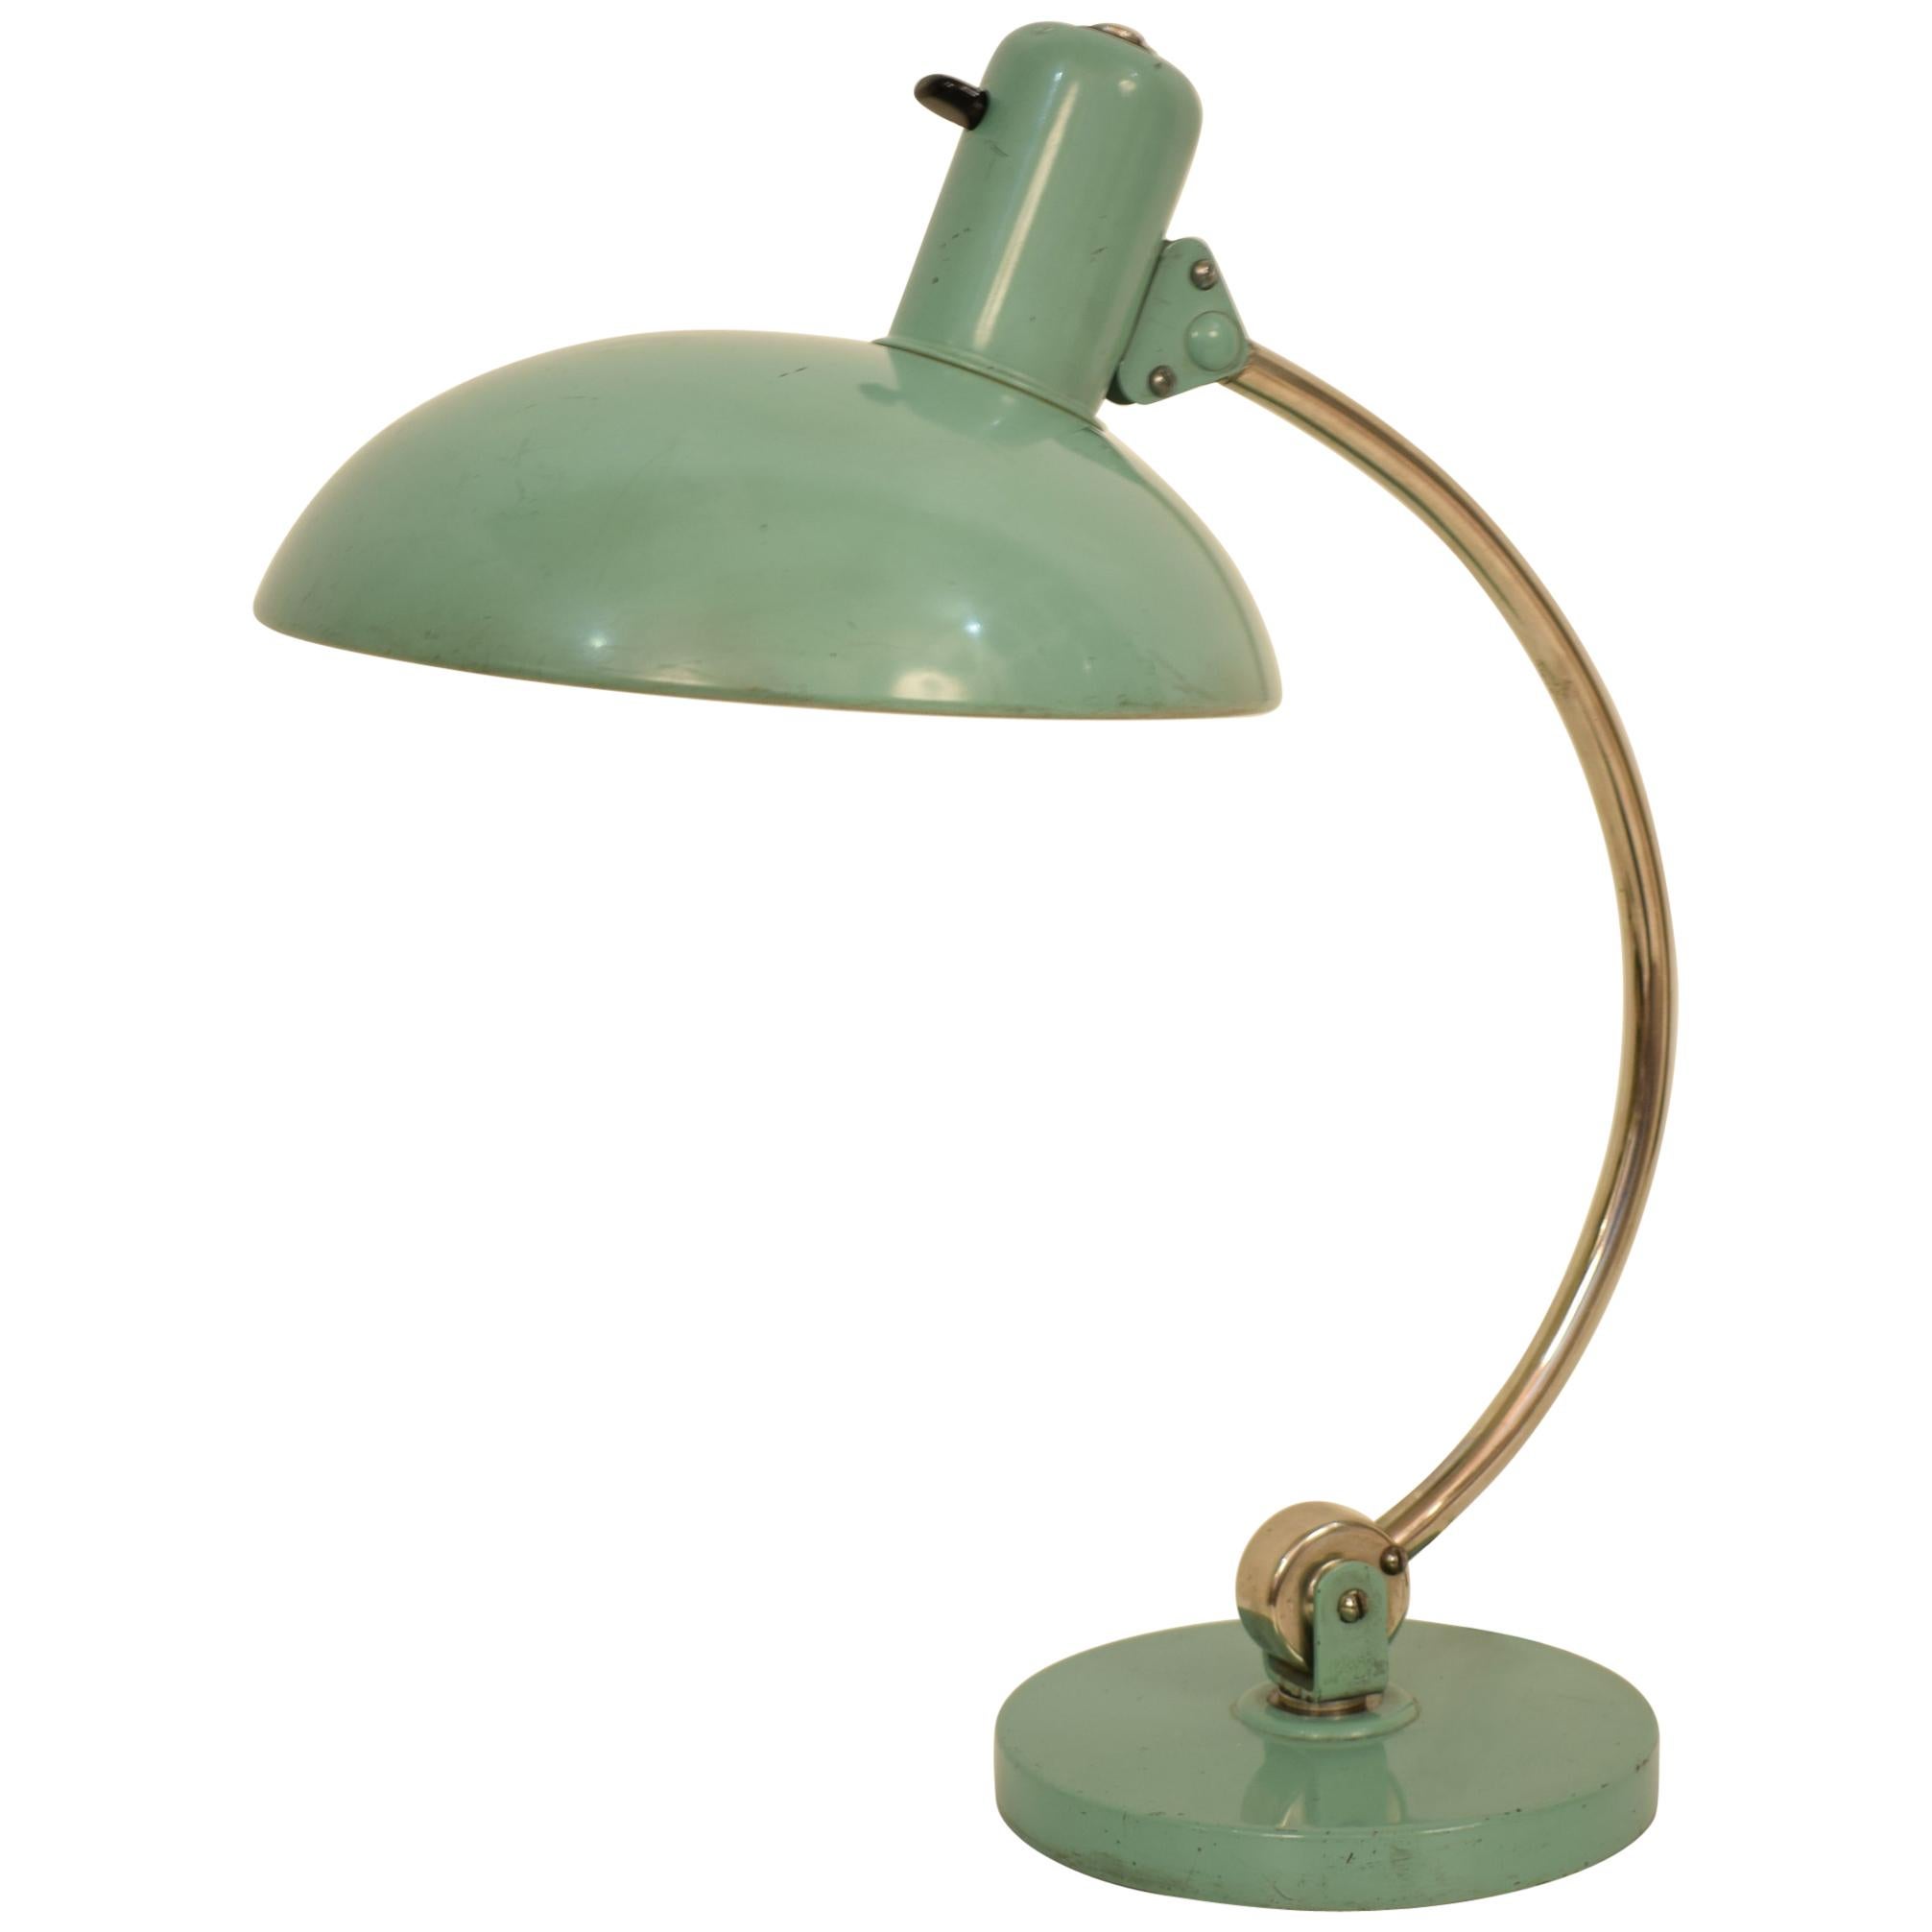 Midcentury Mint Green Table Lamp by Kaiser Idell, circa 1960